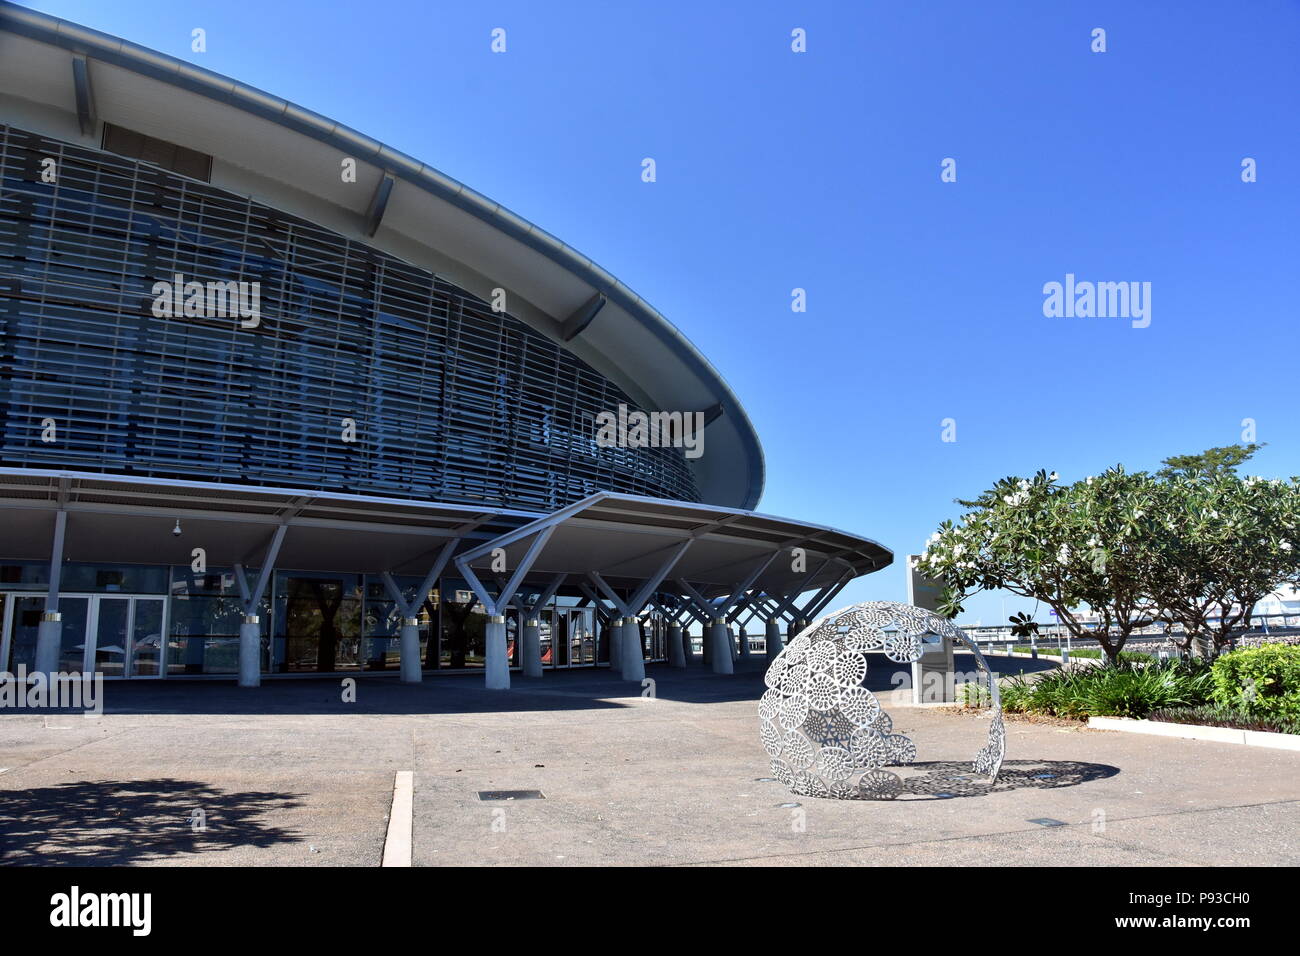 Darwin, Australia - Jun 17, 2018. The world class Darwin Convention Centre is an iconic landmark in the tropical harbour city of the Northern Territor Stock Photo